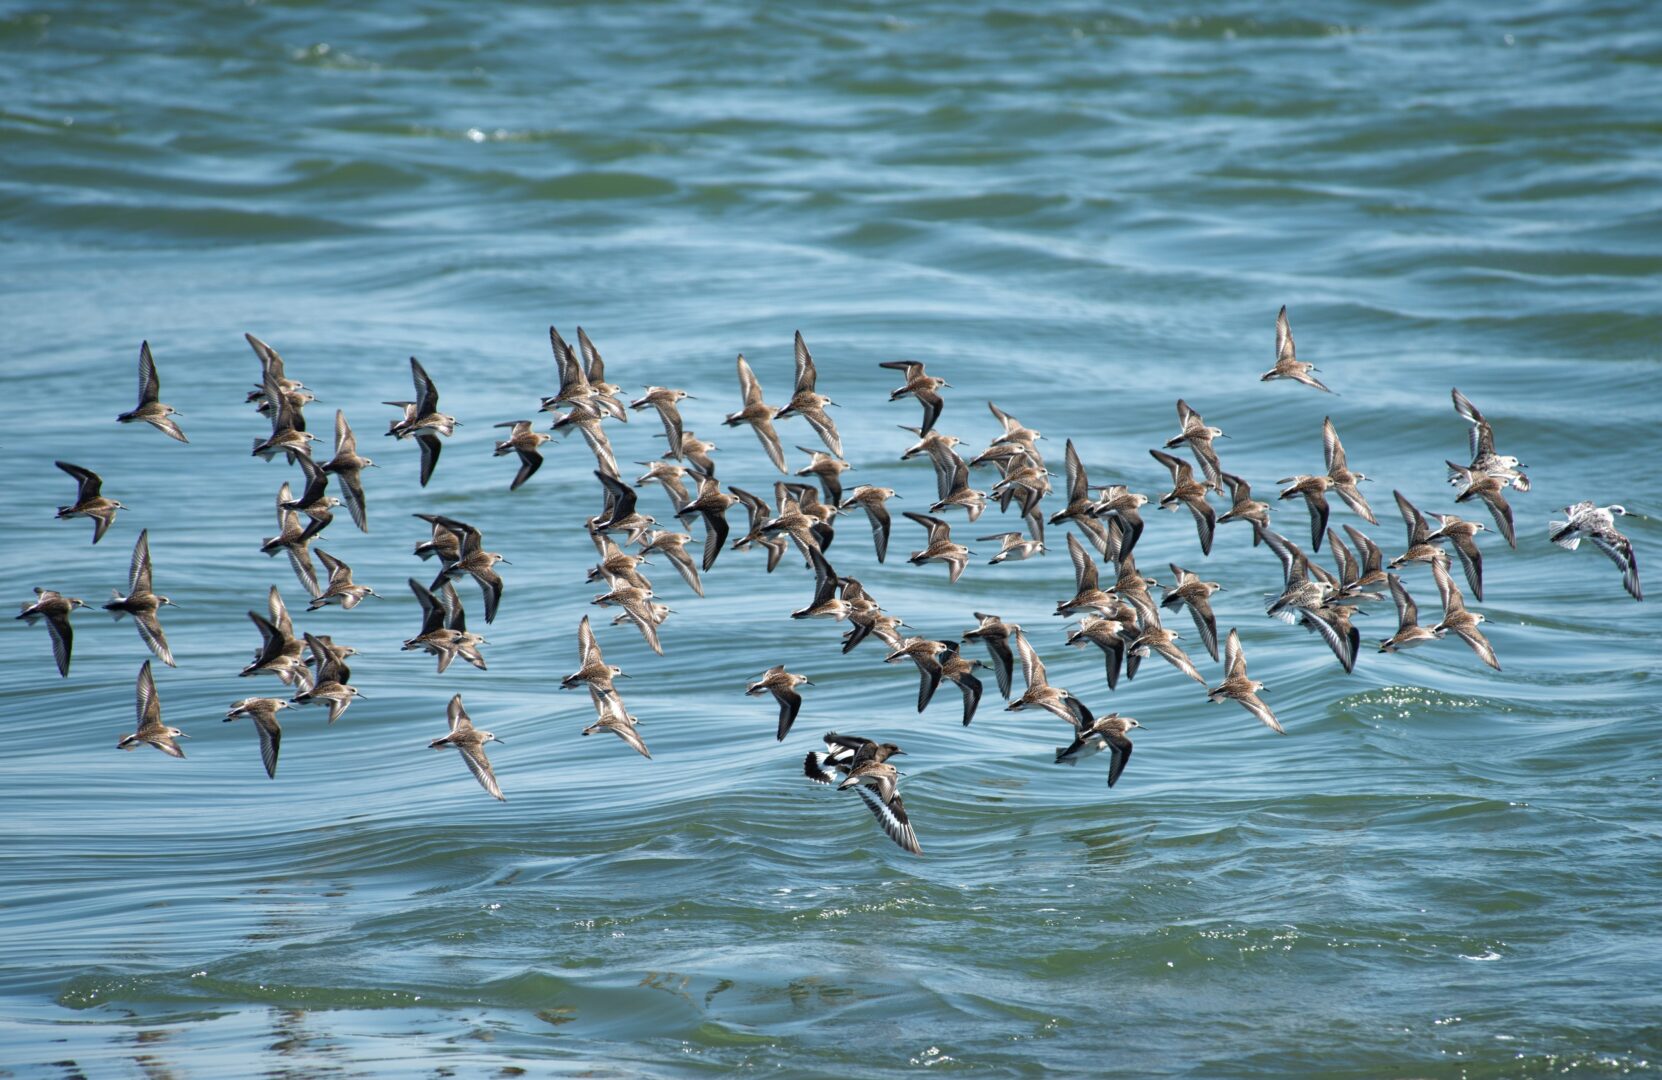 A flock of sand piper birds fly over the ocean.